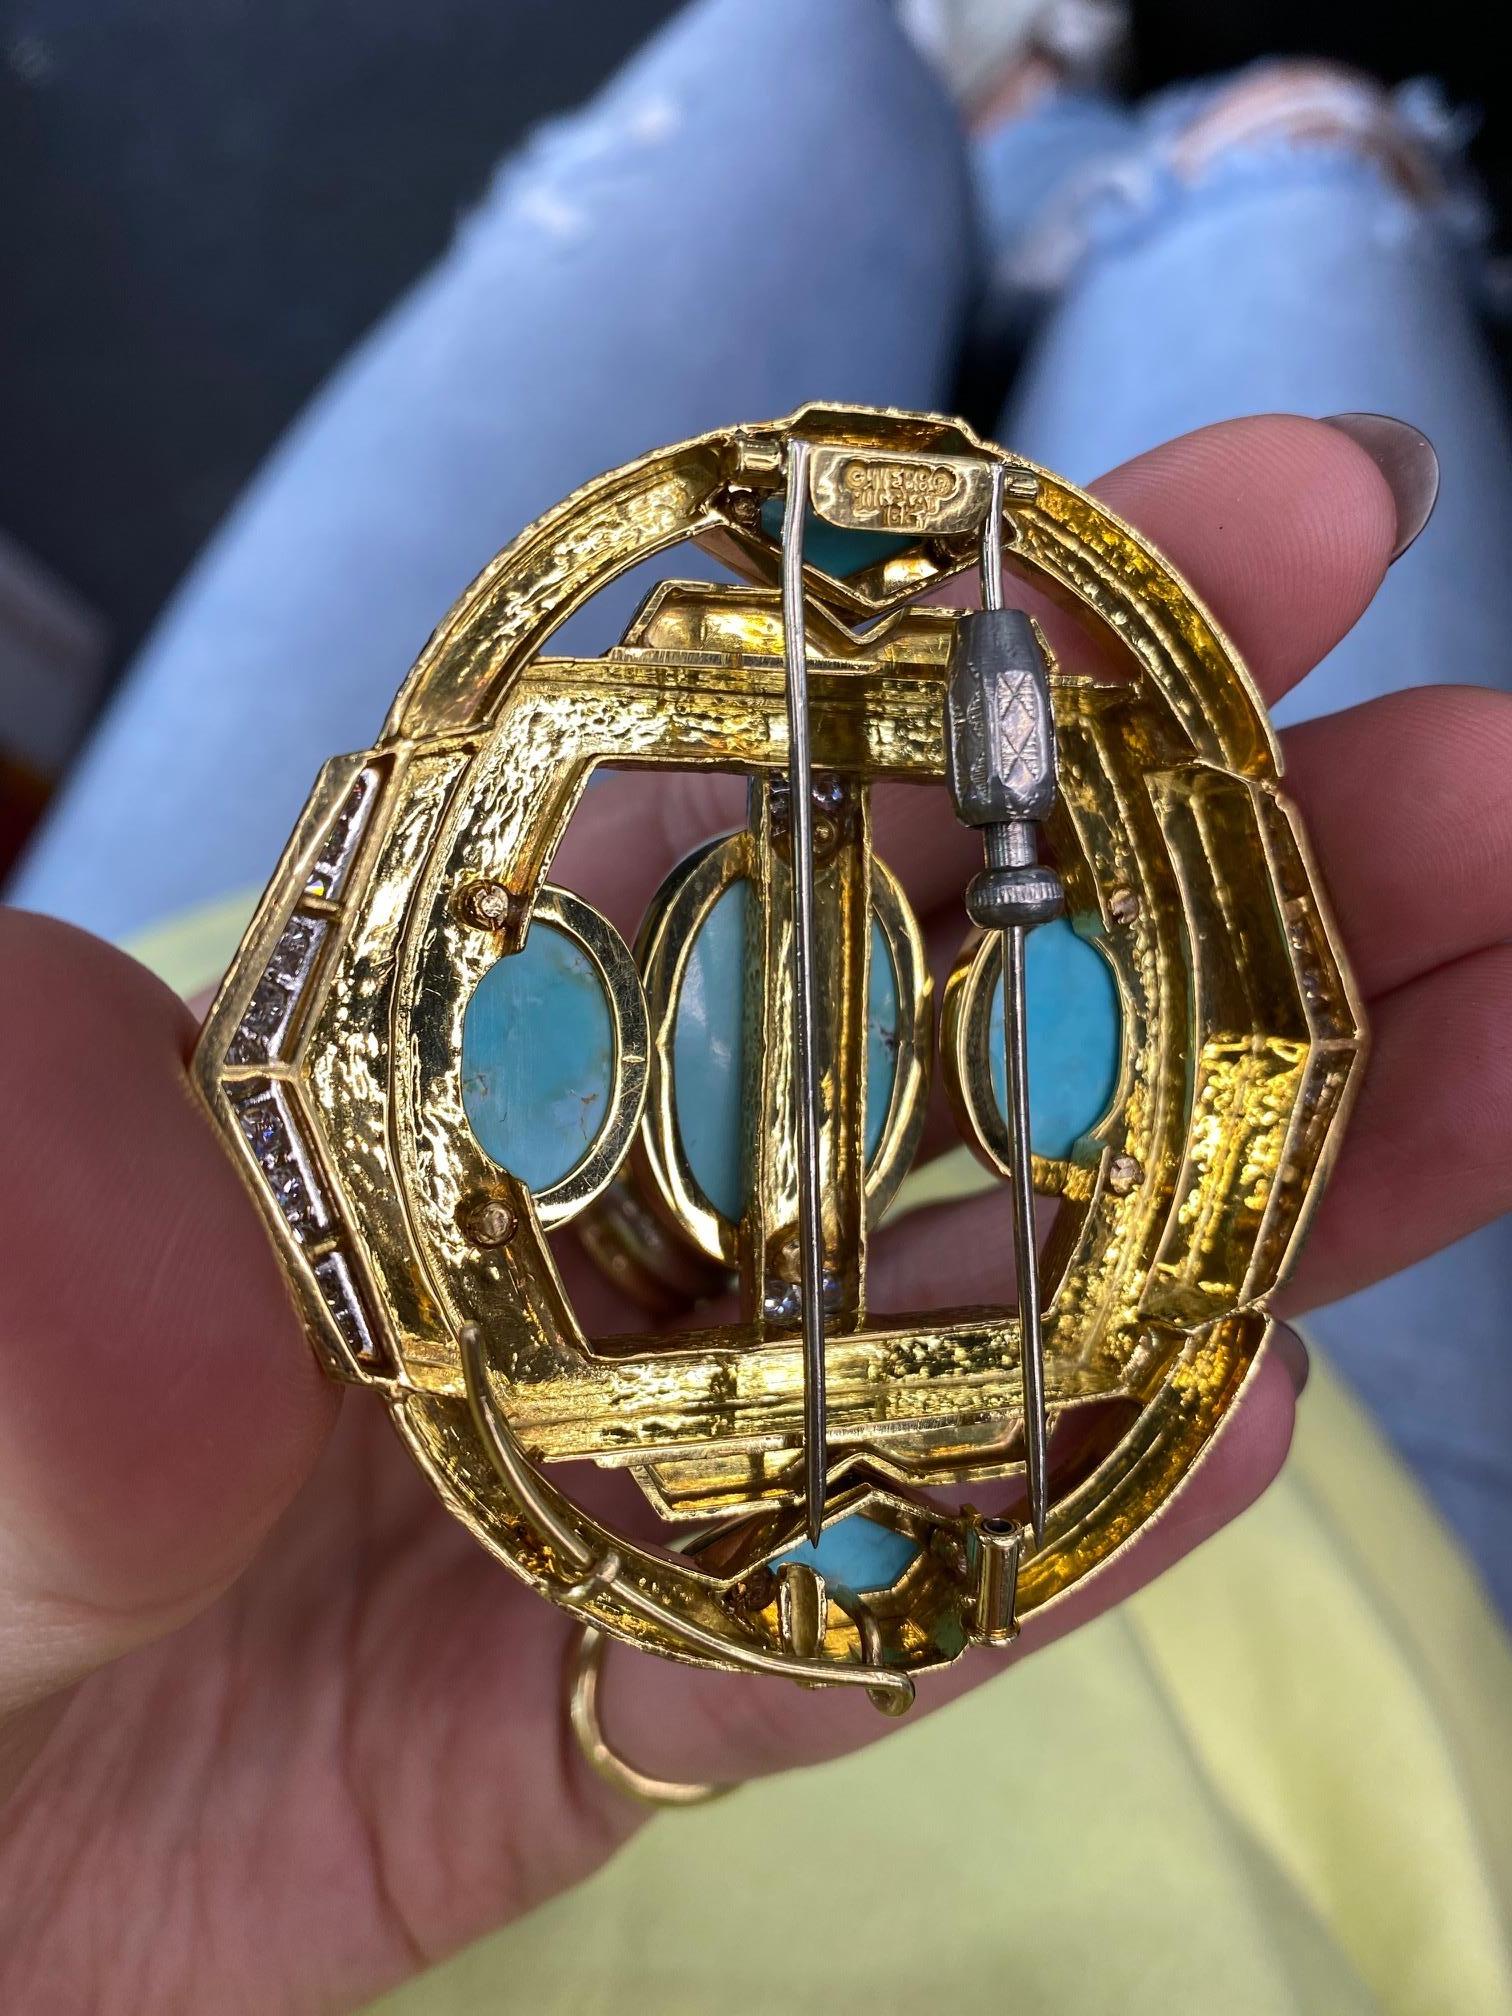 David Webb Platinum & 18K Yellow Gold Turquoise, Diamonds, Hammered Finish Brooch

L: 2.5 inches
W: 2.5 inches at it's widest
Three oval cabochon turquoise.
Two shield cut cabochon turquoises.
Round Cut diaonds: approx 1.50cts.
Double pin closure.